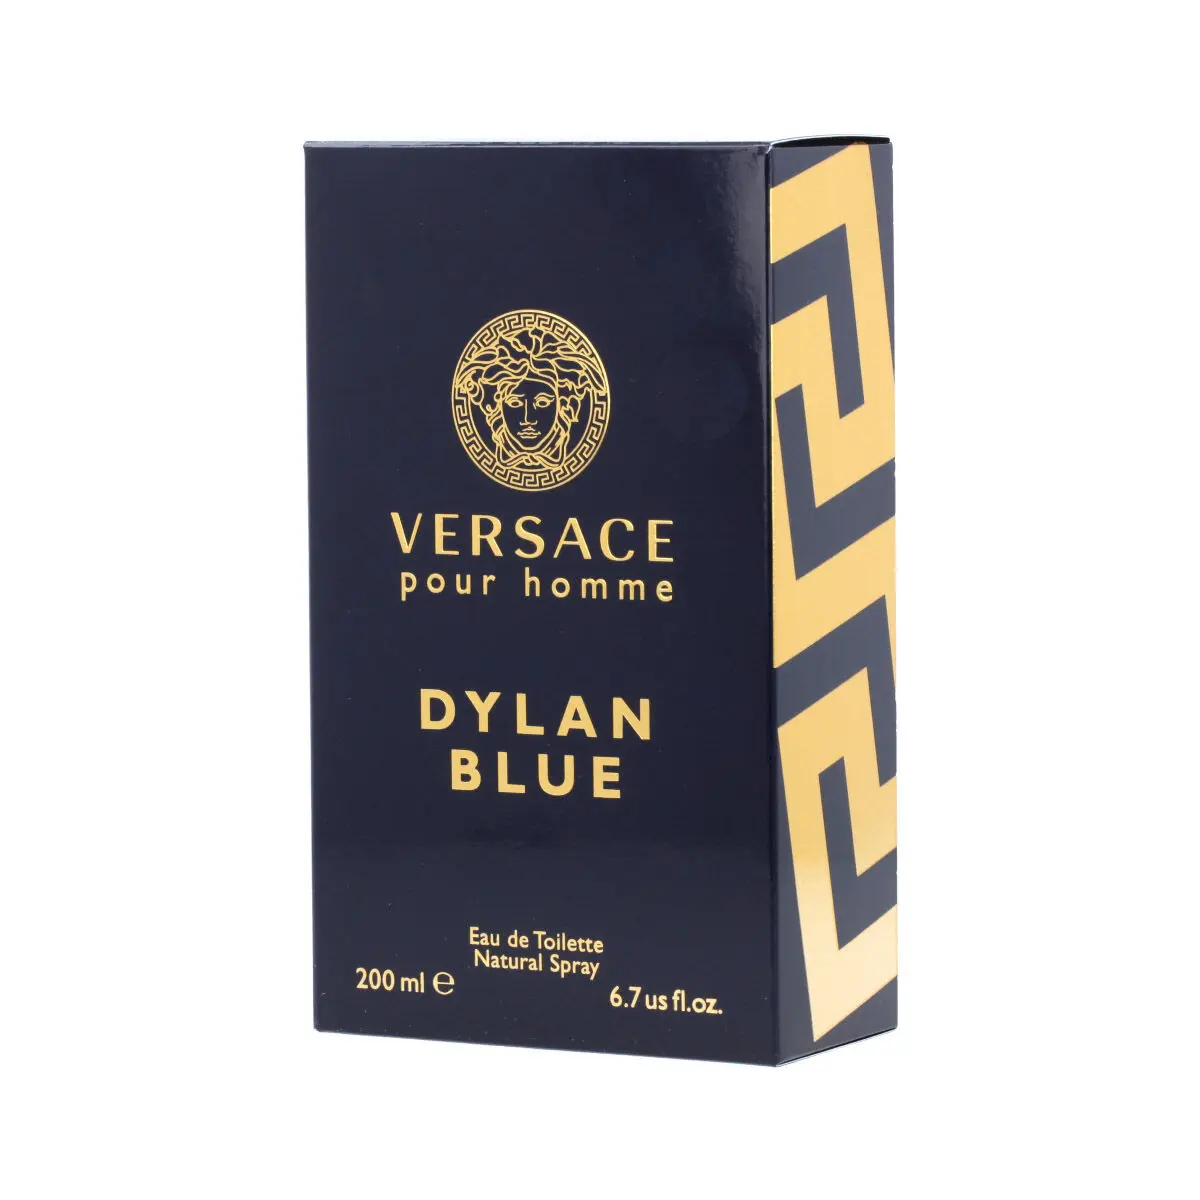 Profumo Uomo Versace Pour Homme Dylan Blue EDT EDT 200 ml